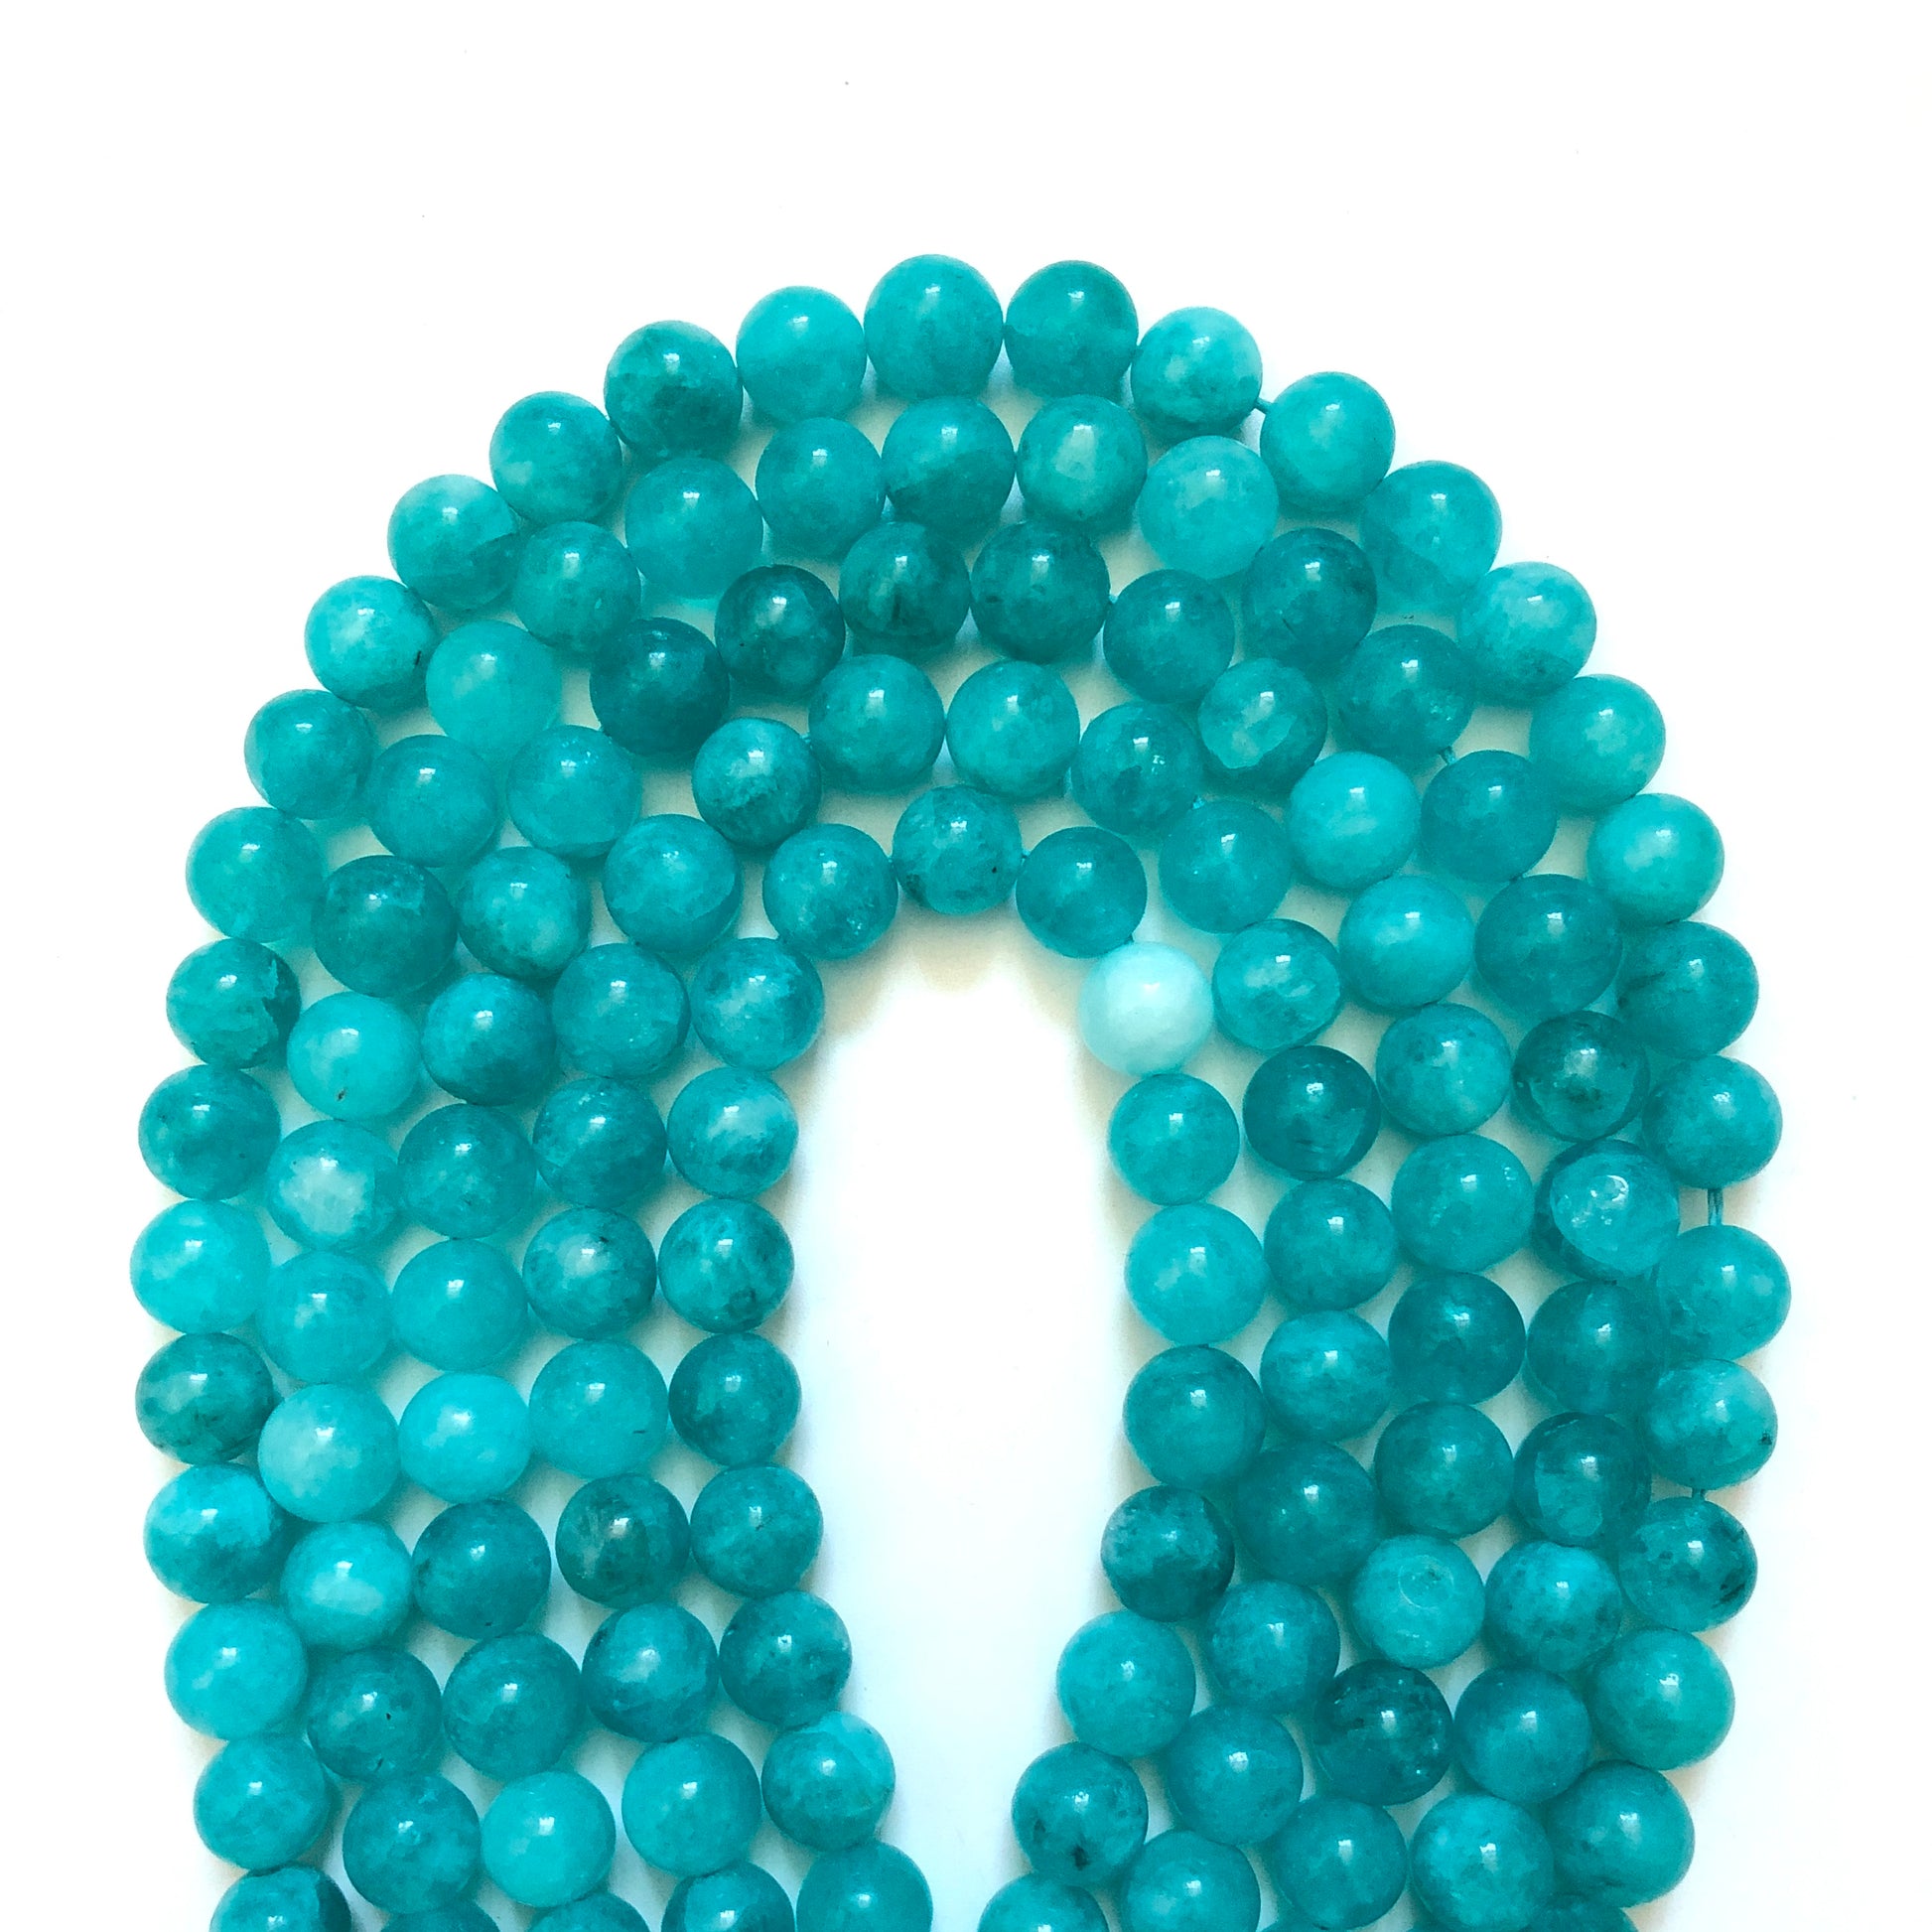 2 Strands/lot 10mm Blue Amazonite Round Stone Beads Stone Beads New Beads Arrivals Other Stone Beads Charms Beads Beyond